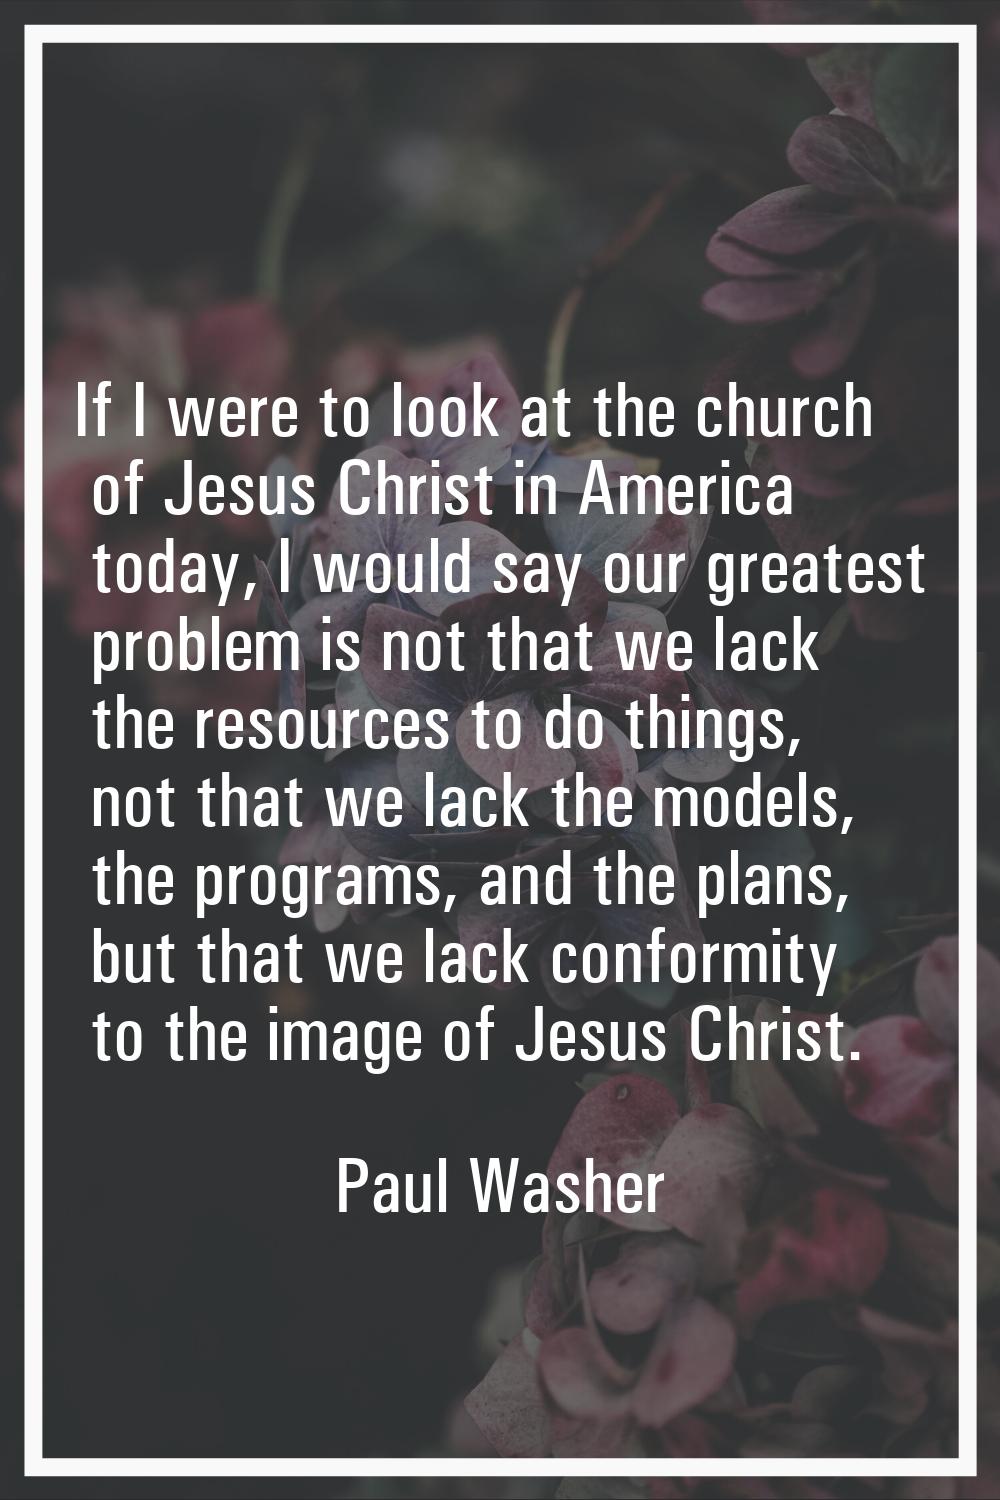 If I were to look at the church of Jesus Christ in America today, I would say our greatest problem 